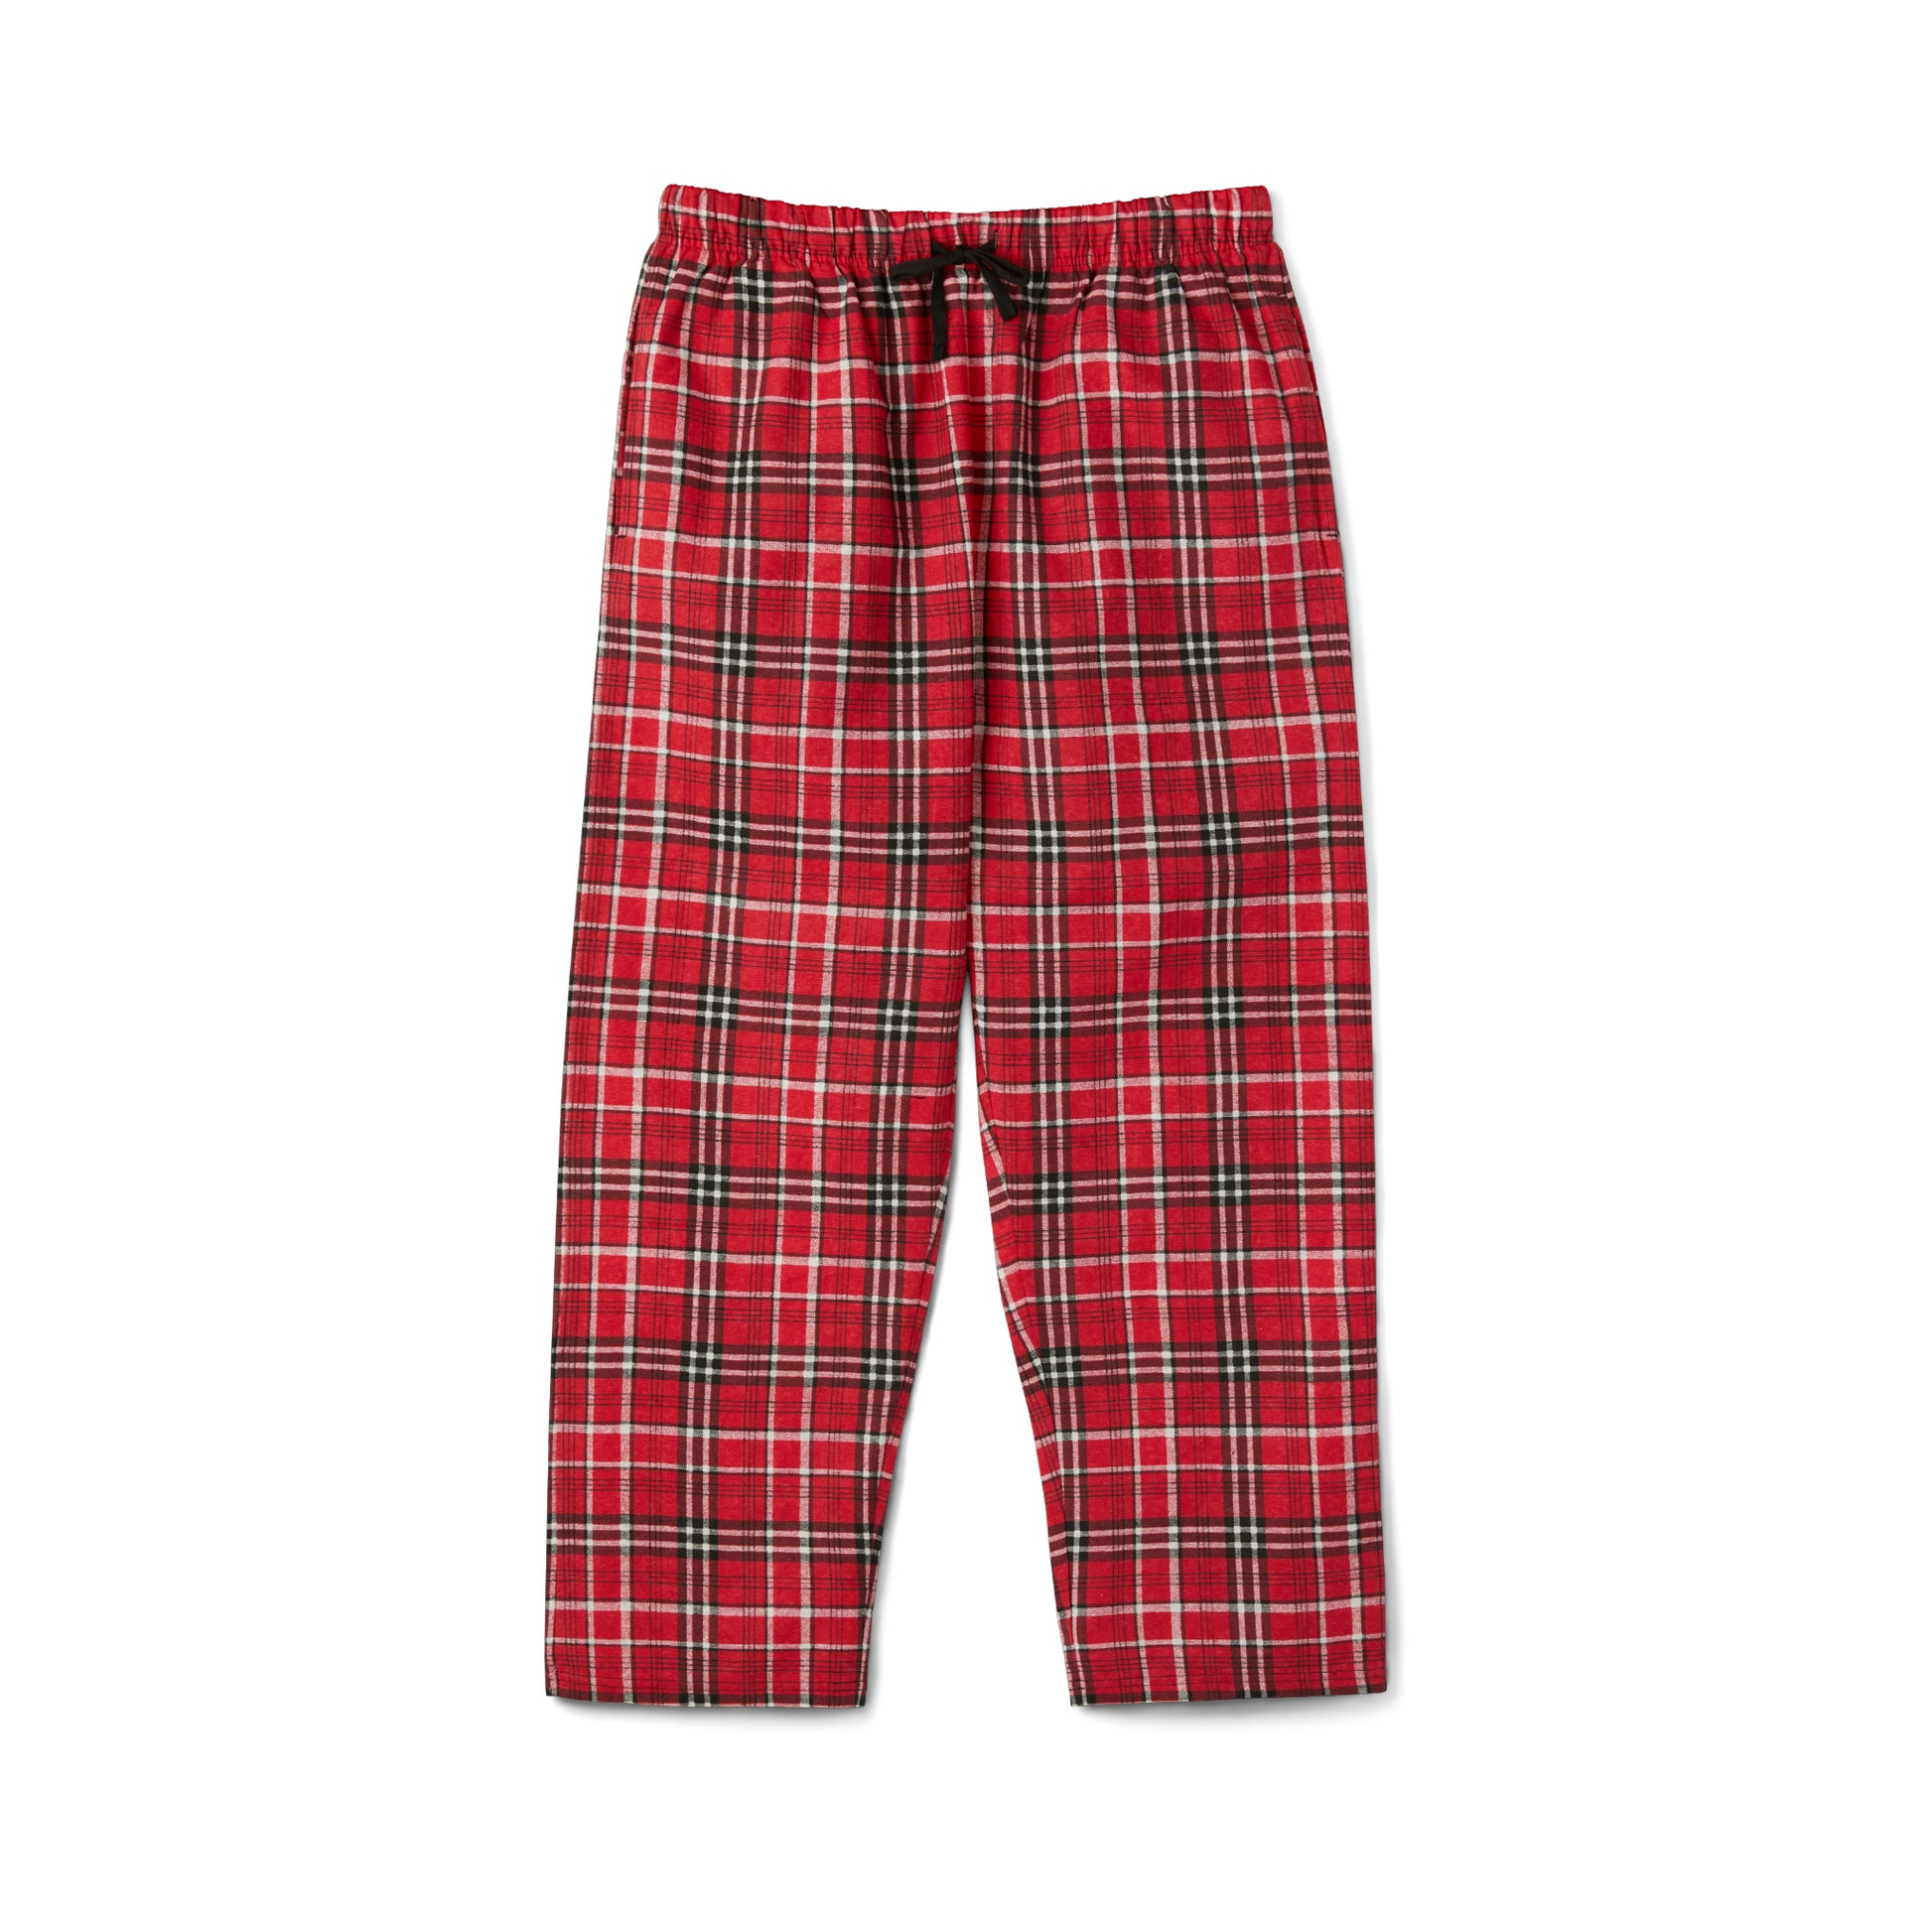 Printify's Women's Short-Sleeve Pajama-Set: 2-pc.; 4 sizes; Red plaid pants with an elastic waistband. Made from 100% cotton.